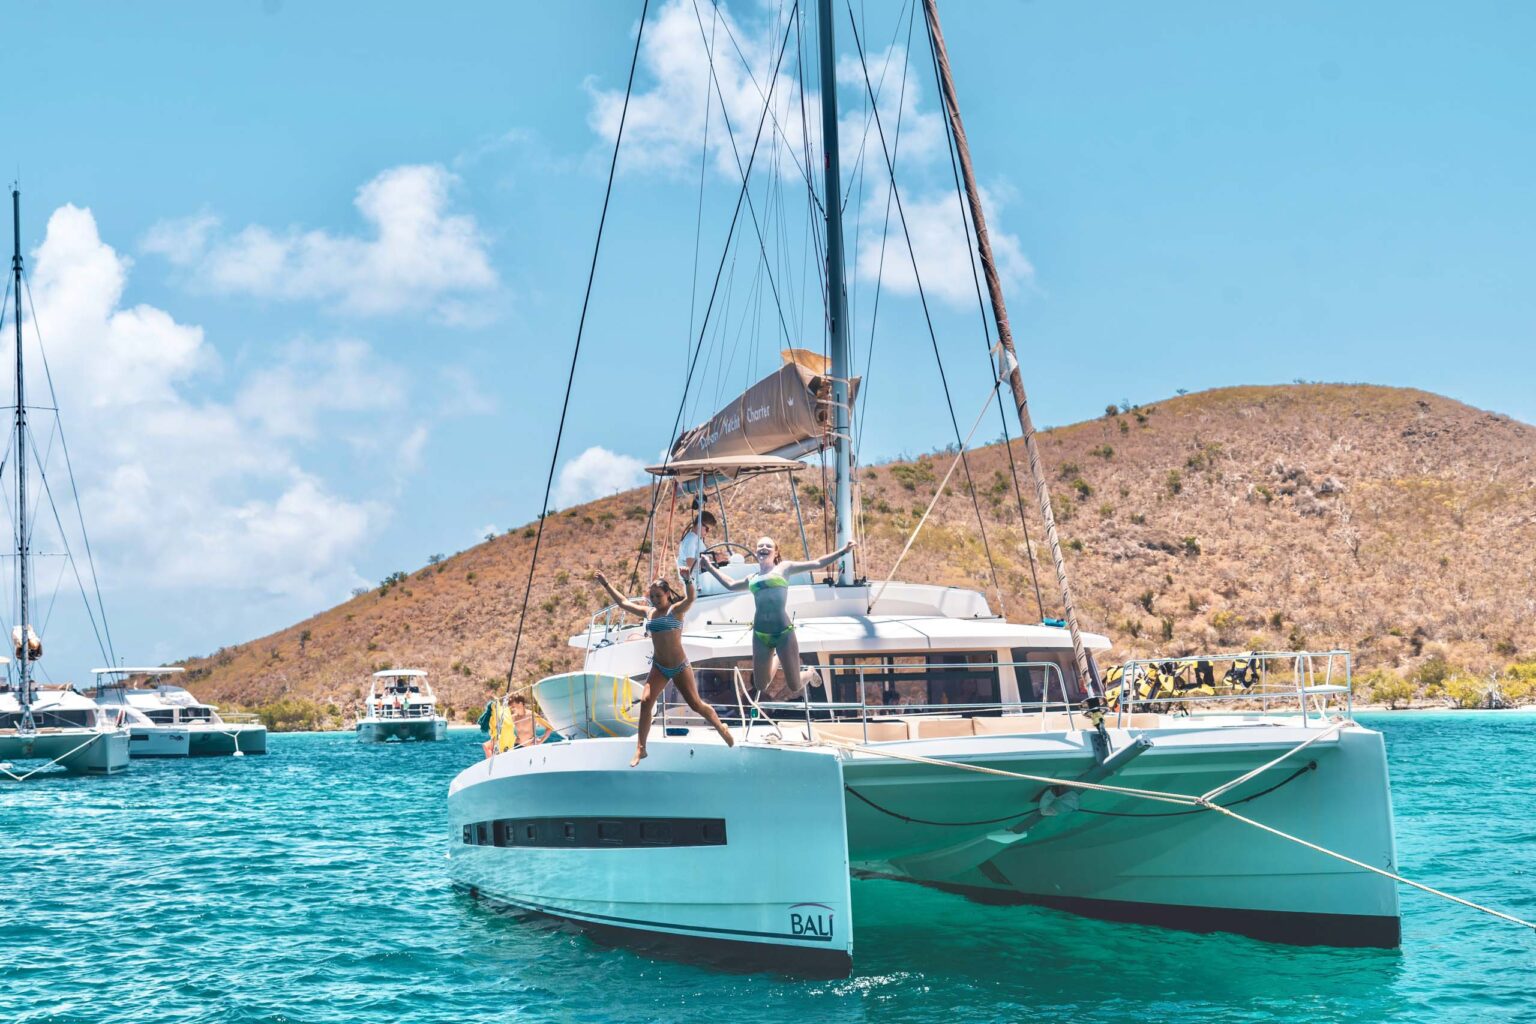 A catamaran is docked in the water near a hill.